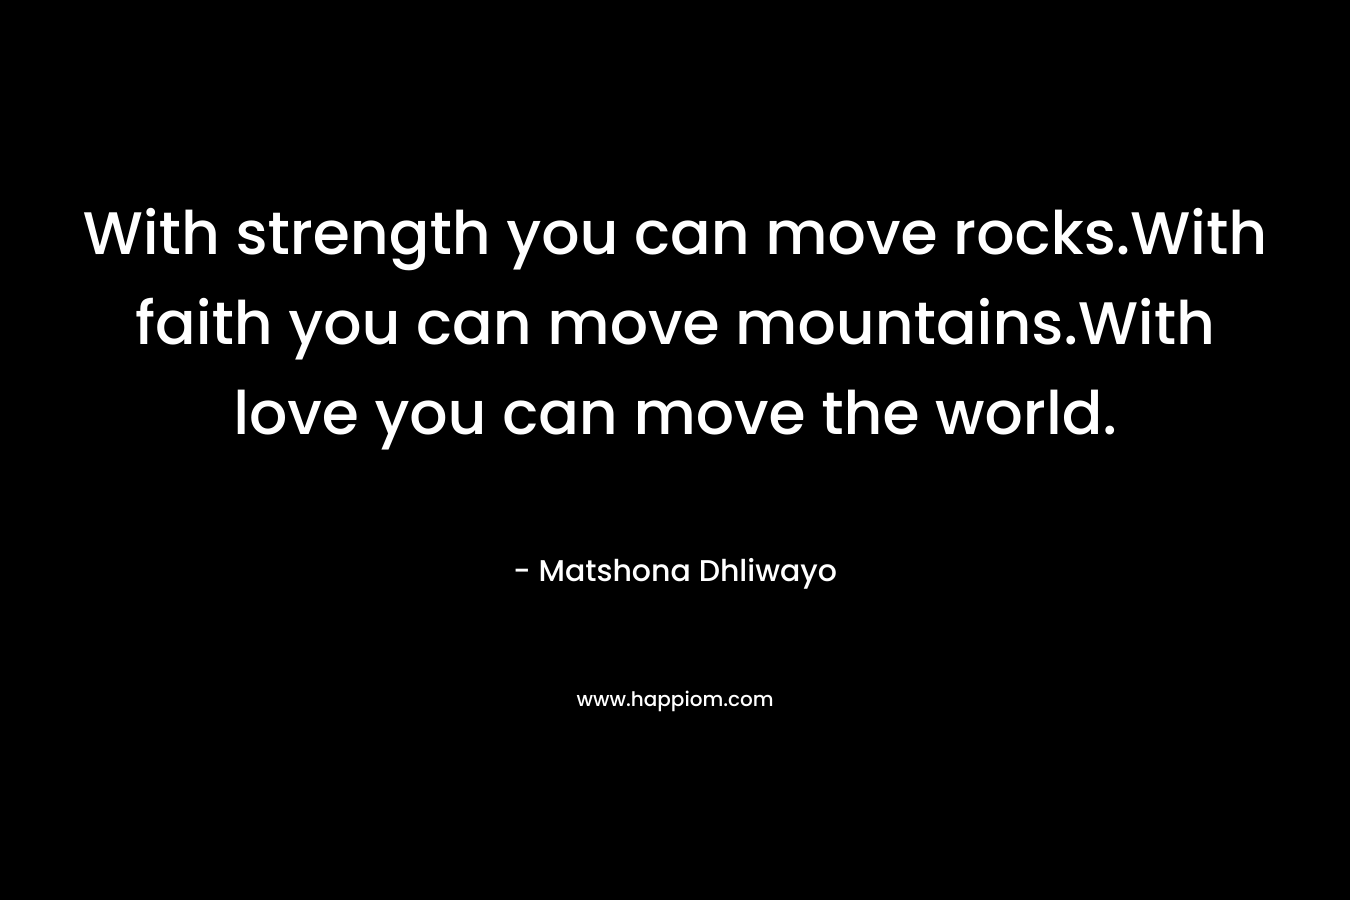 With strength you can move rocks.With faith you can move mountains.With love you can move the world.